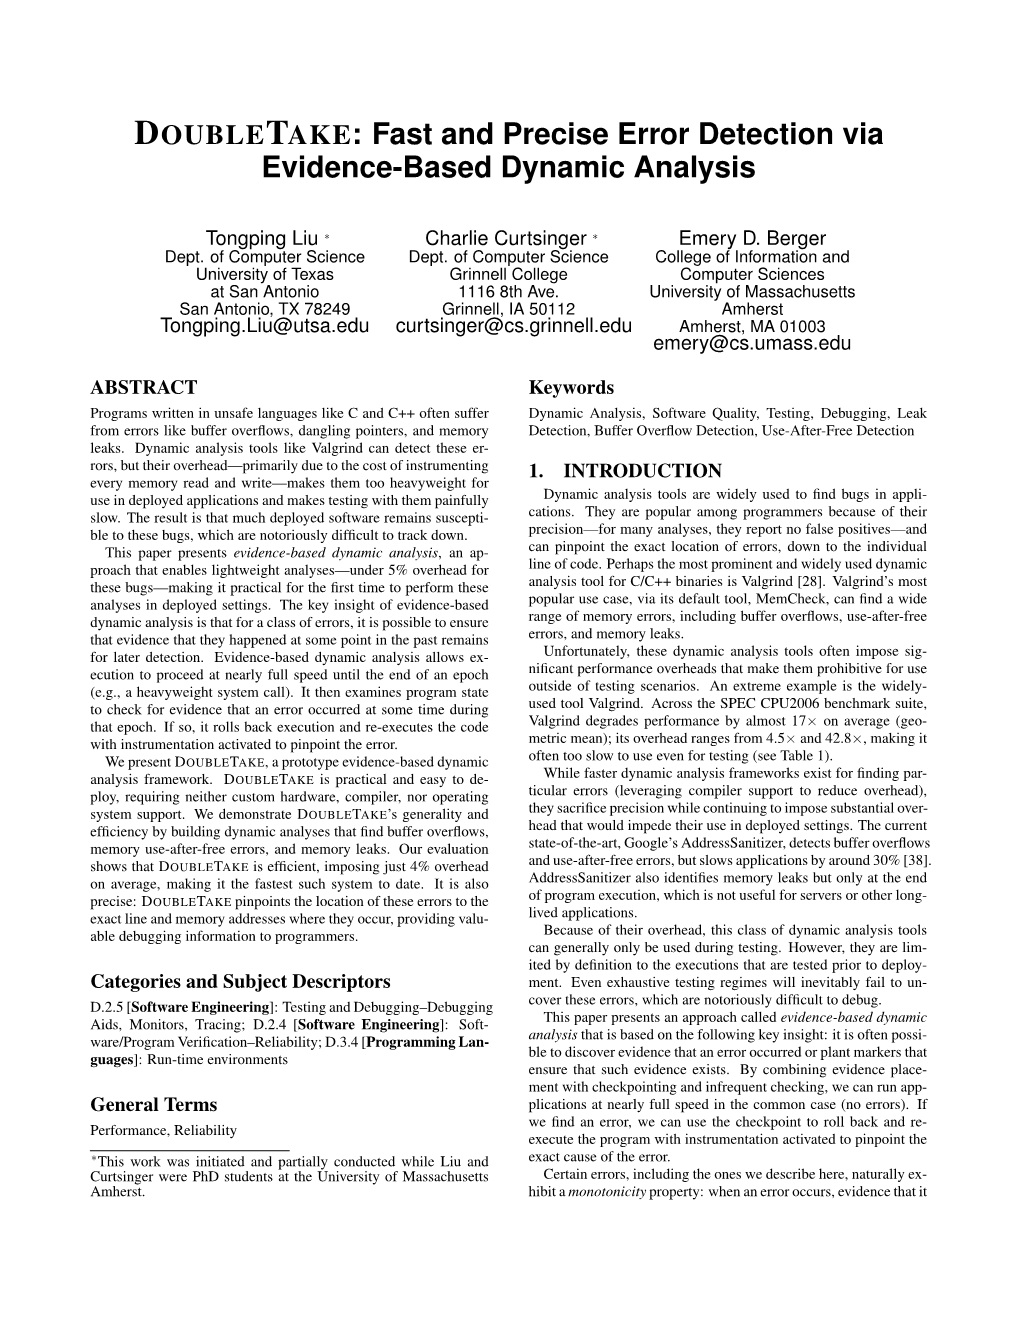 Fast and Precise Error Detection Via Evidence-Based Dynamic Analysis